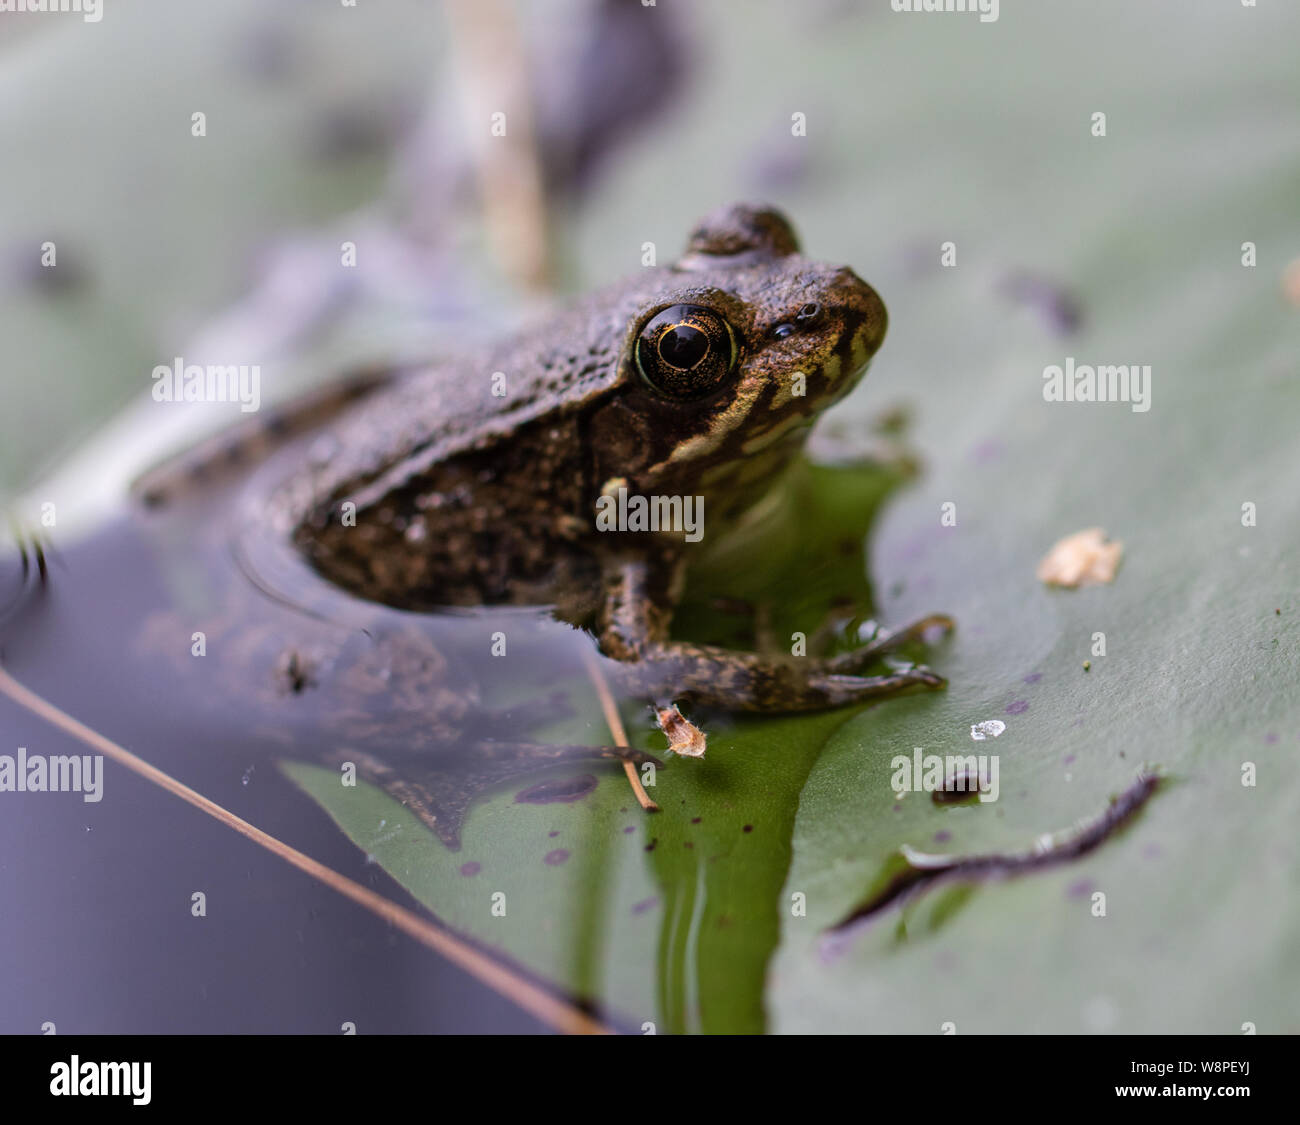 A small green frog on a lily pad in a natural pond habitat Stock Photo